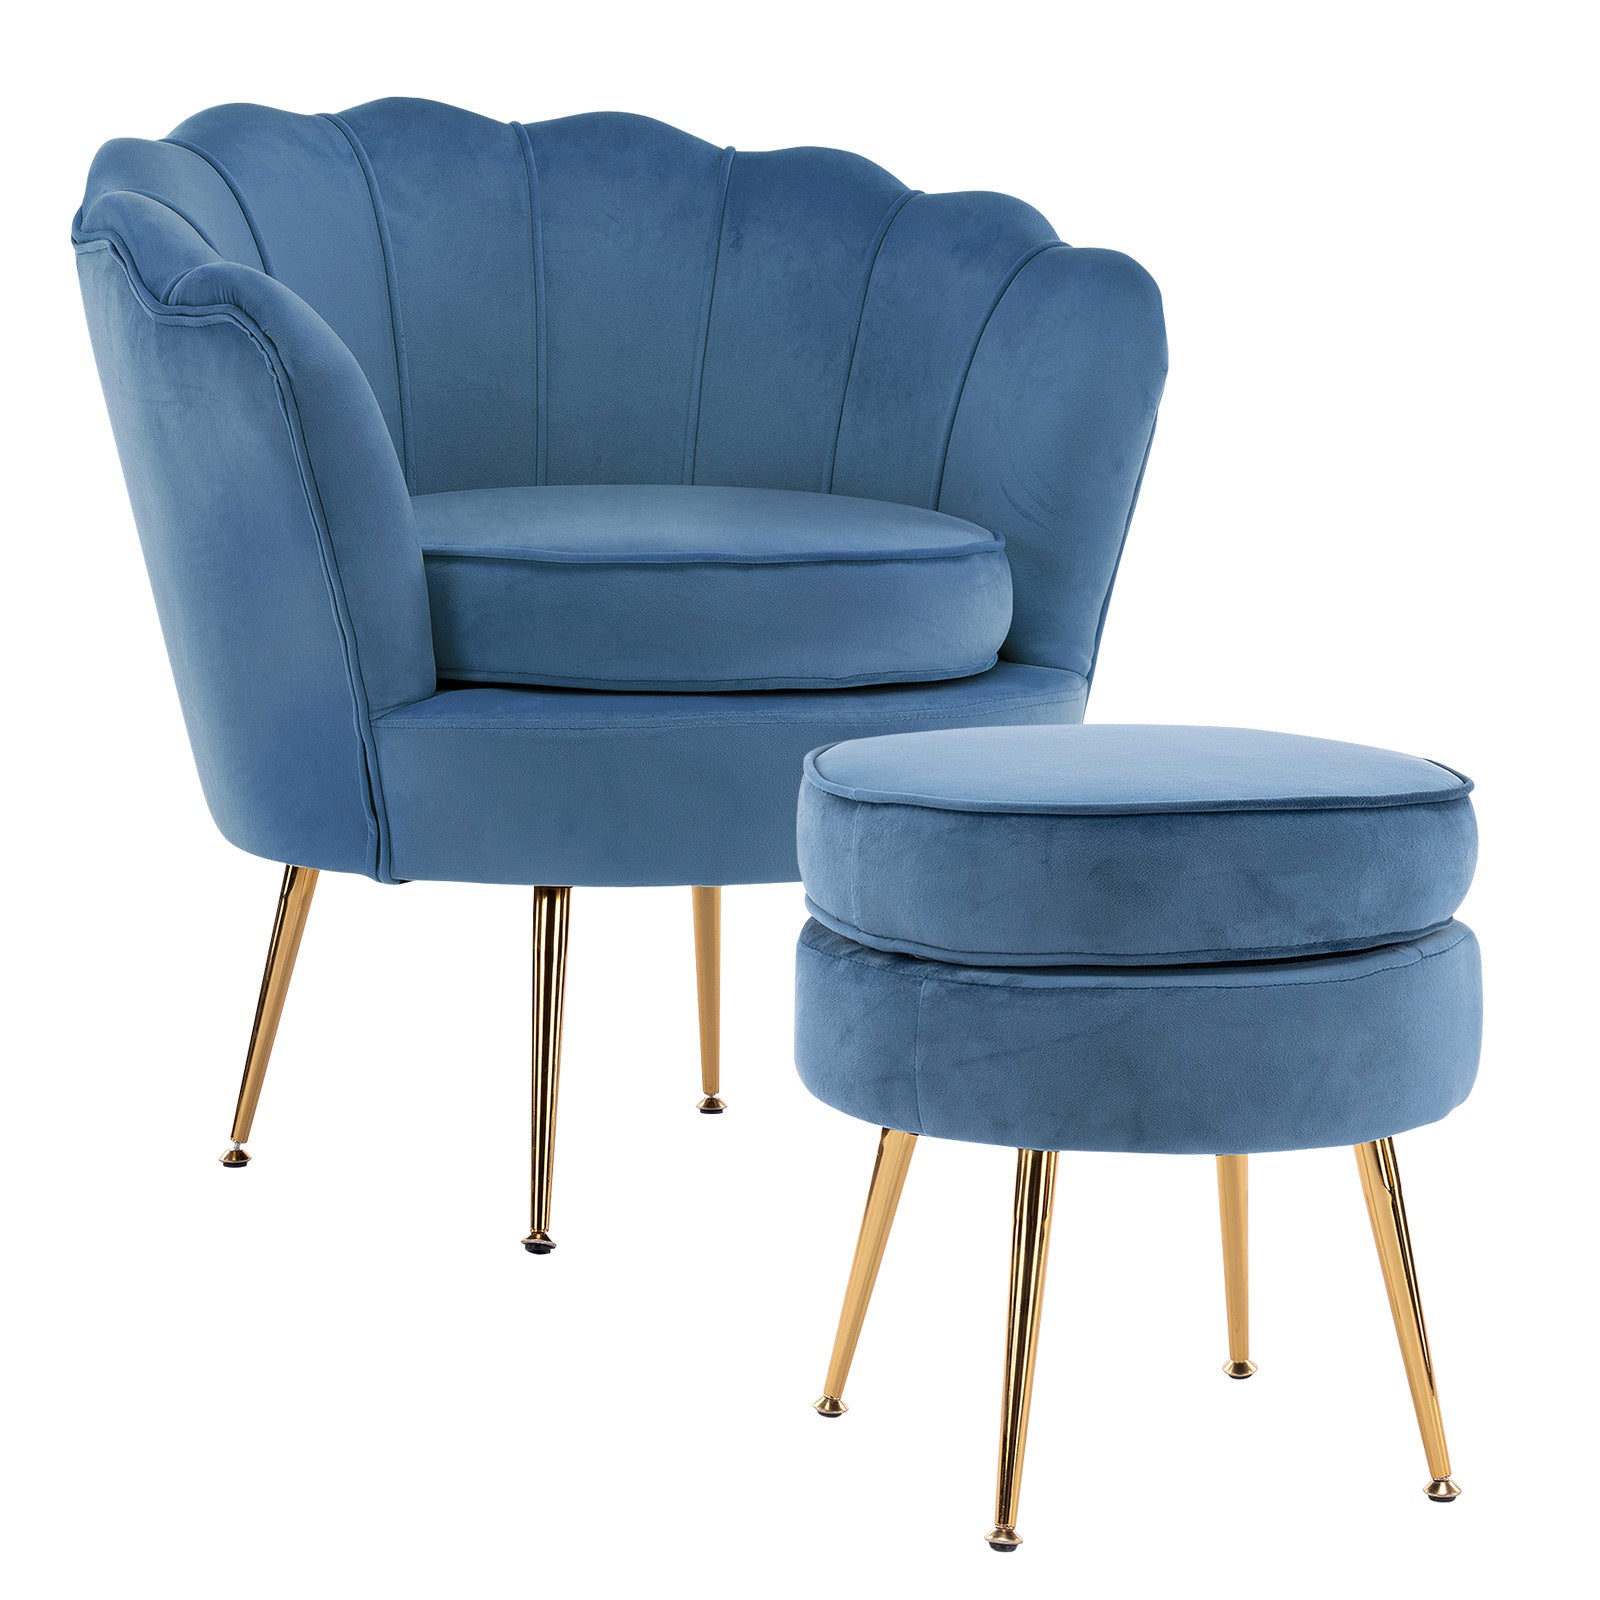 La Bella Shell Scallop Navy Blue Armchair Accent Chair Velvet + Round Ottoman Footstool-Armchairs-PEROZ Accessories